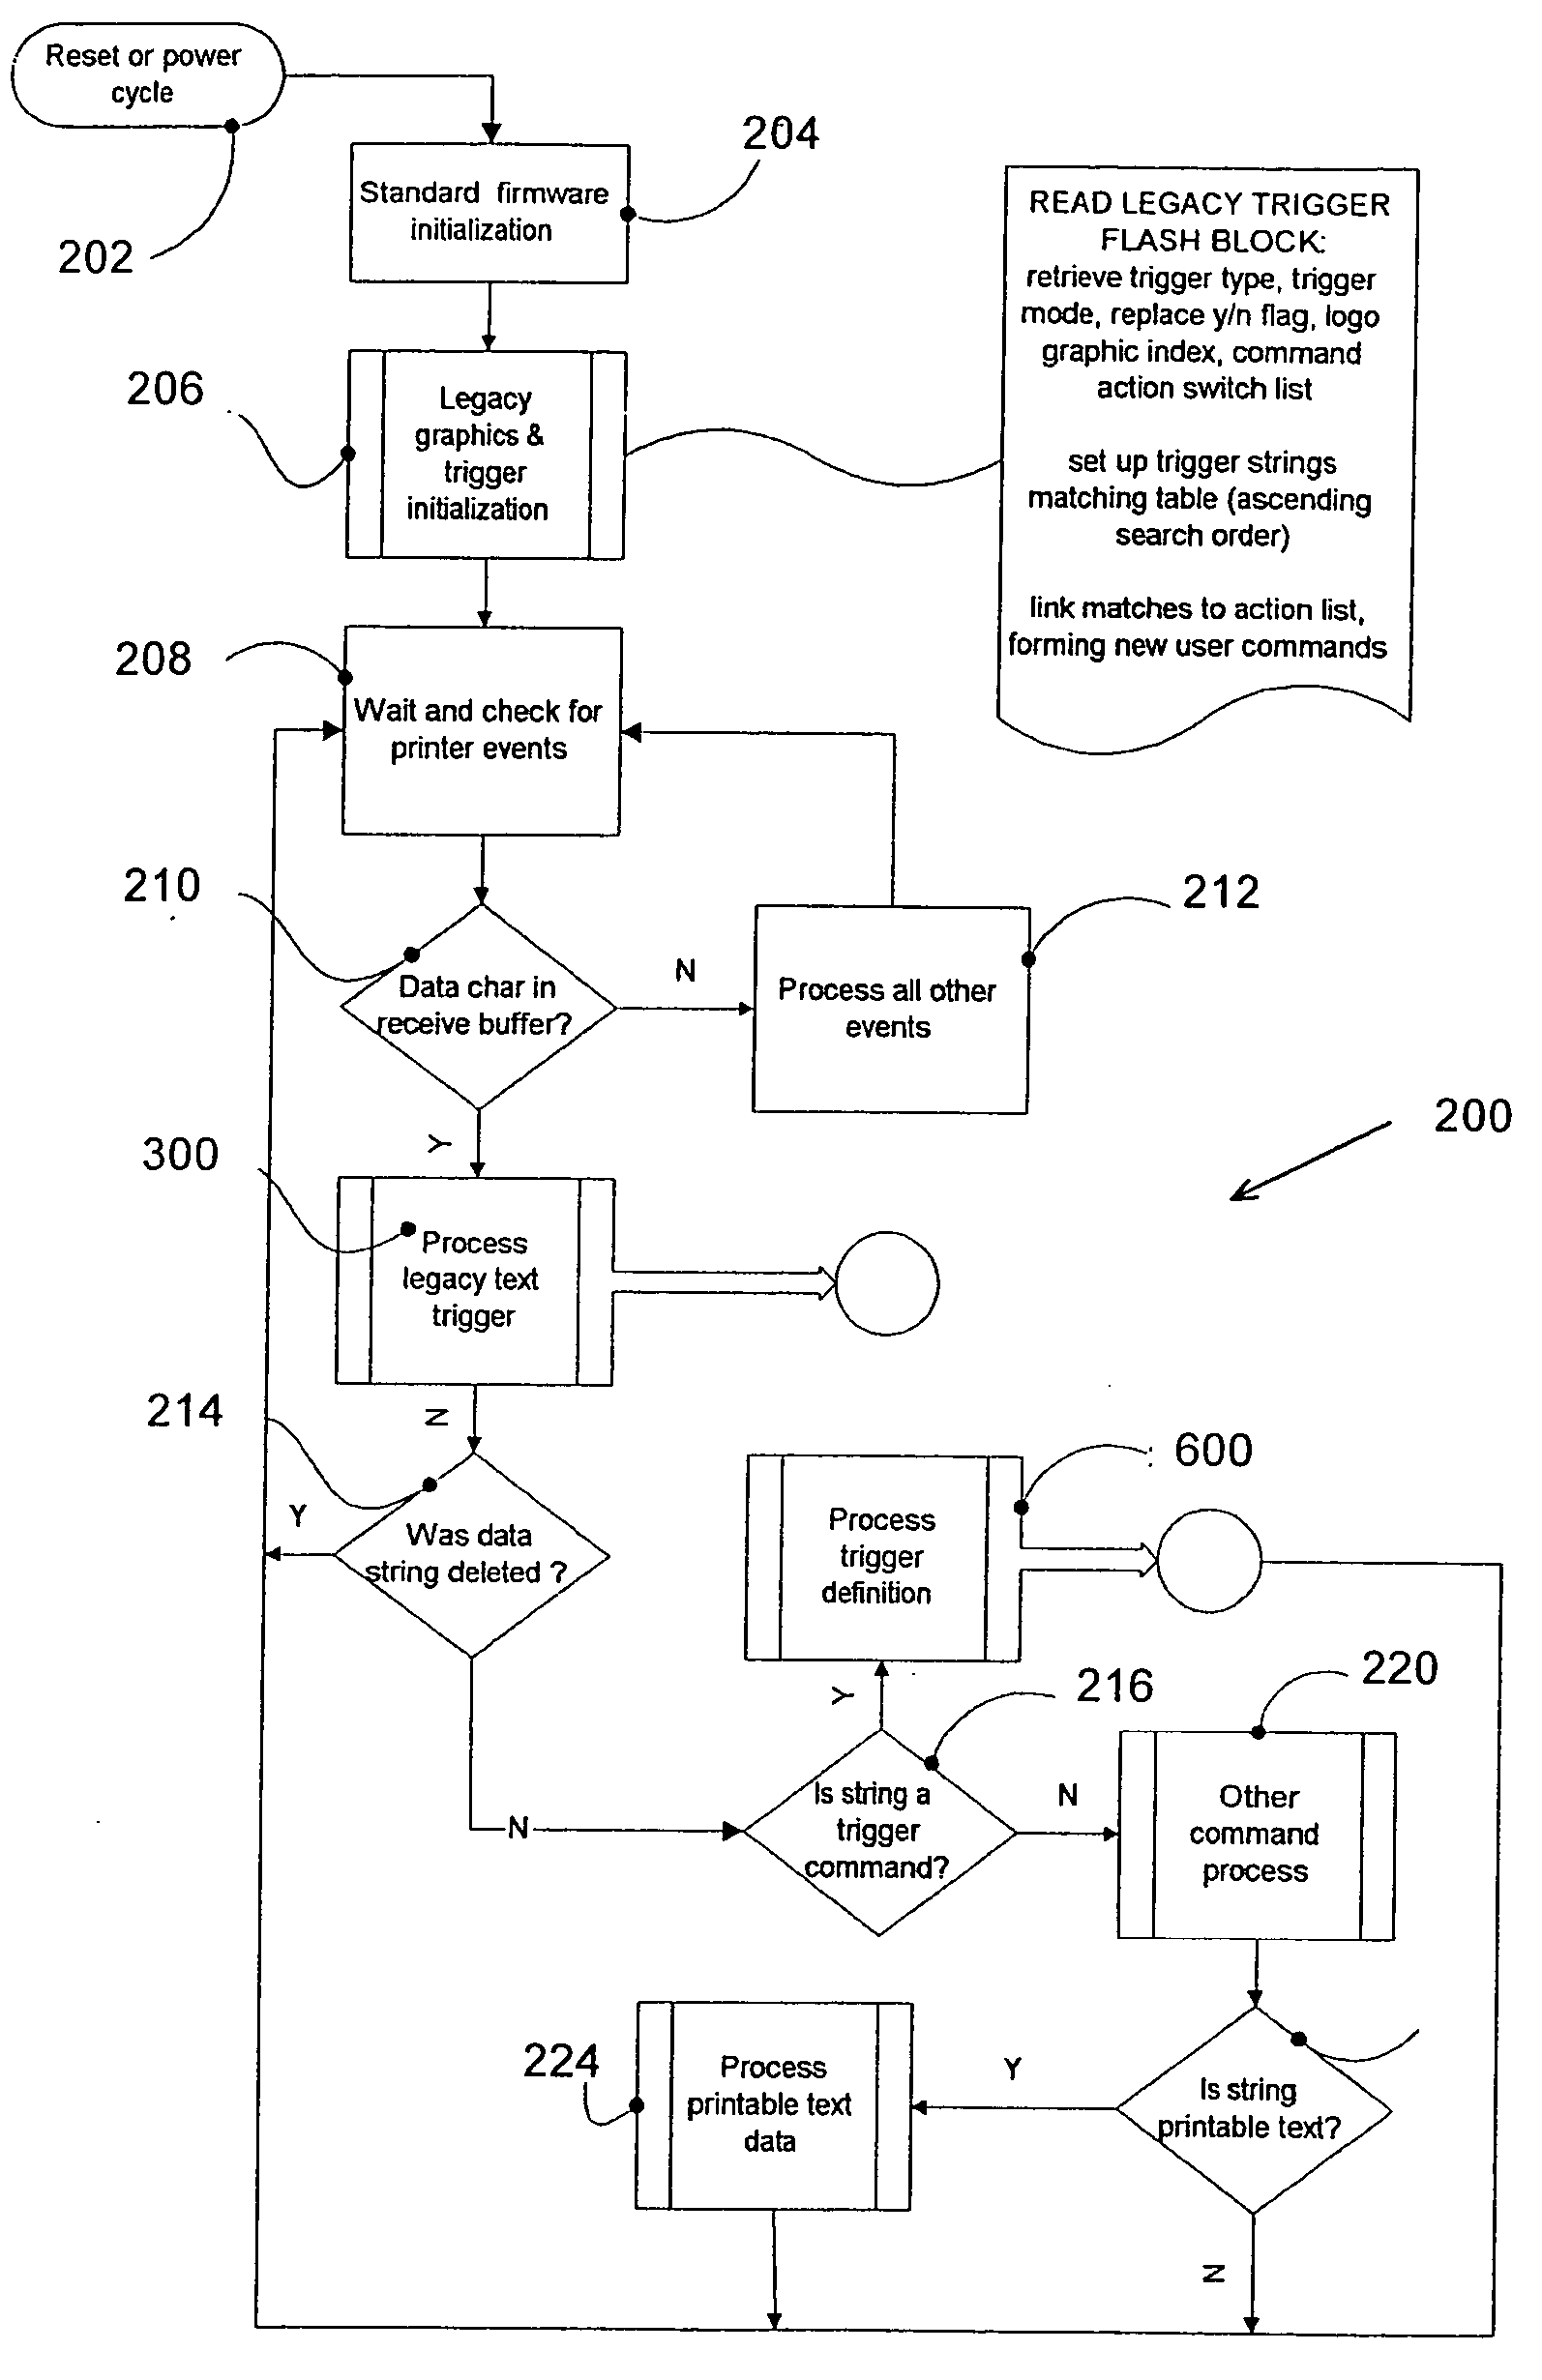 Method and system for suppressing printing of graphics in a POS printer